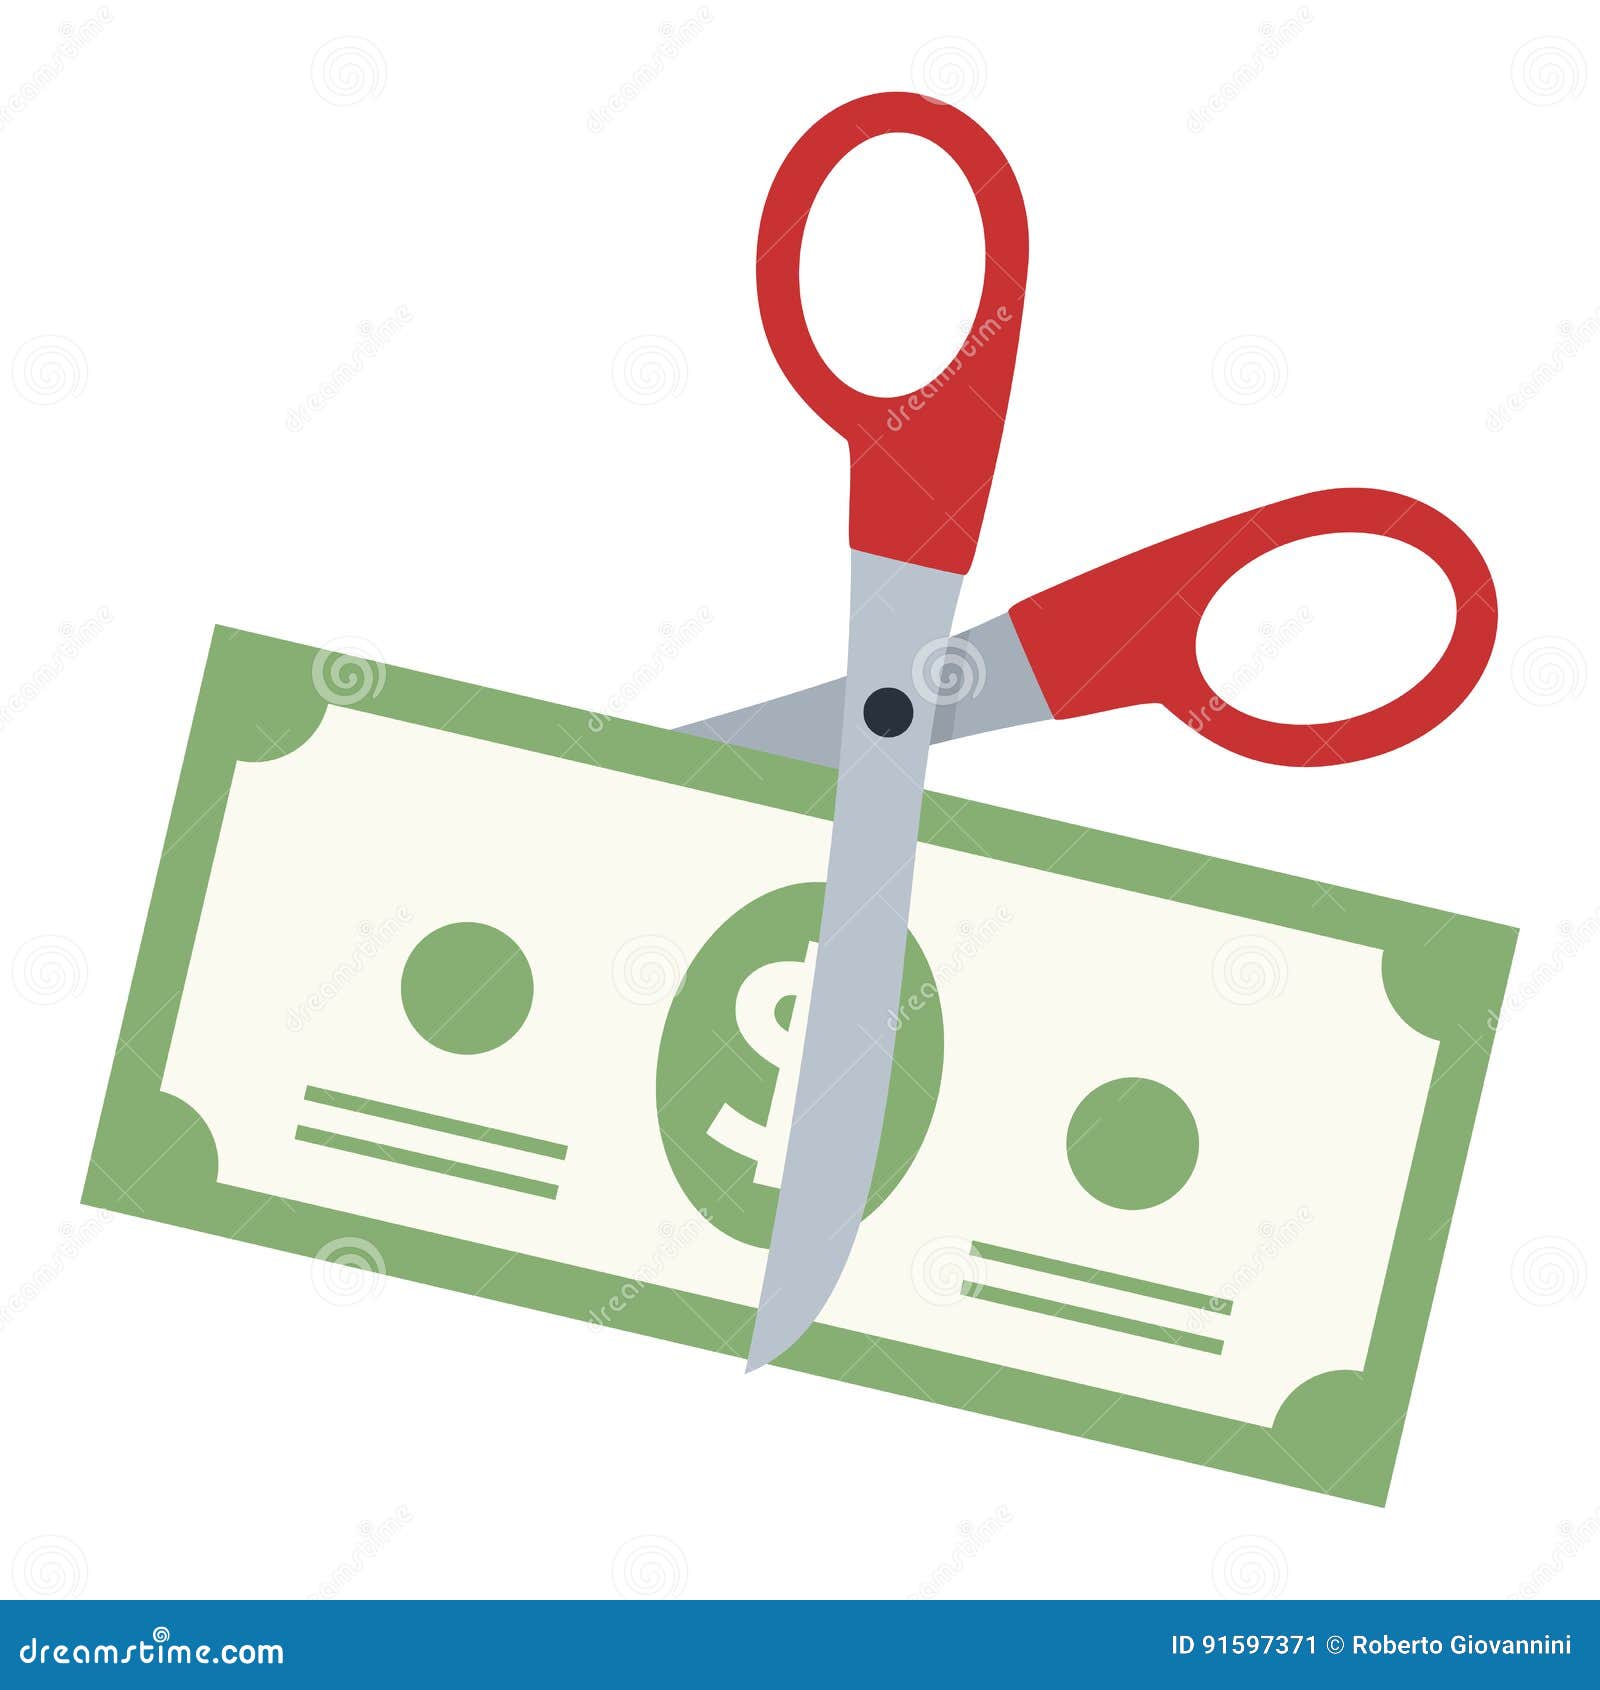 Scissors Cutting a Dollar Banknote Flat Icon Stock Vector ...